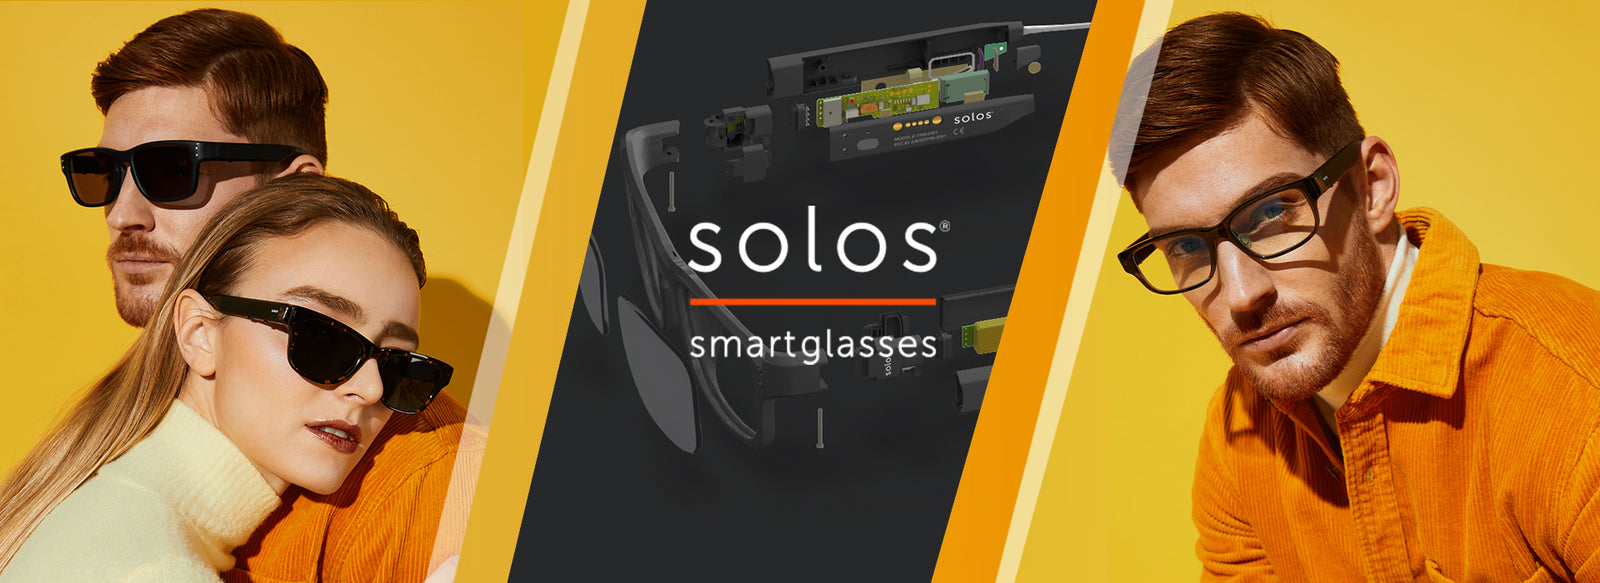 Smart Glasses | Running Aviator Sunglasses: Smart Glasses That Can Identify Objects - Solos Technology Limited